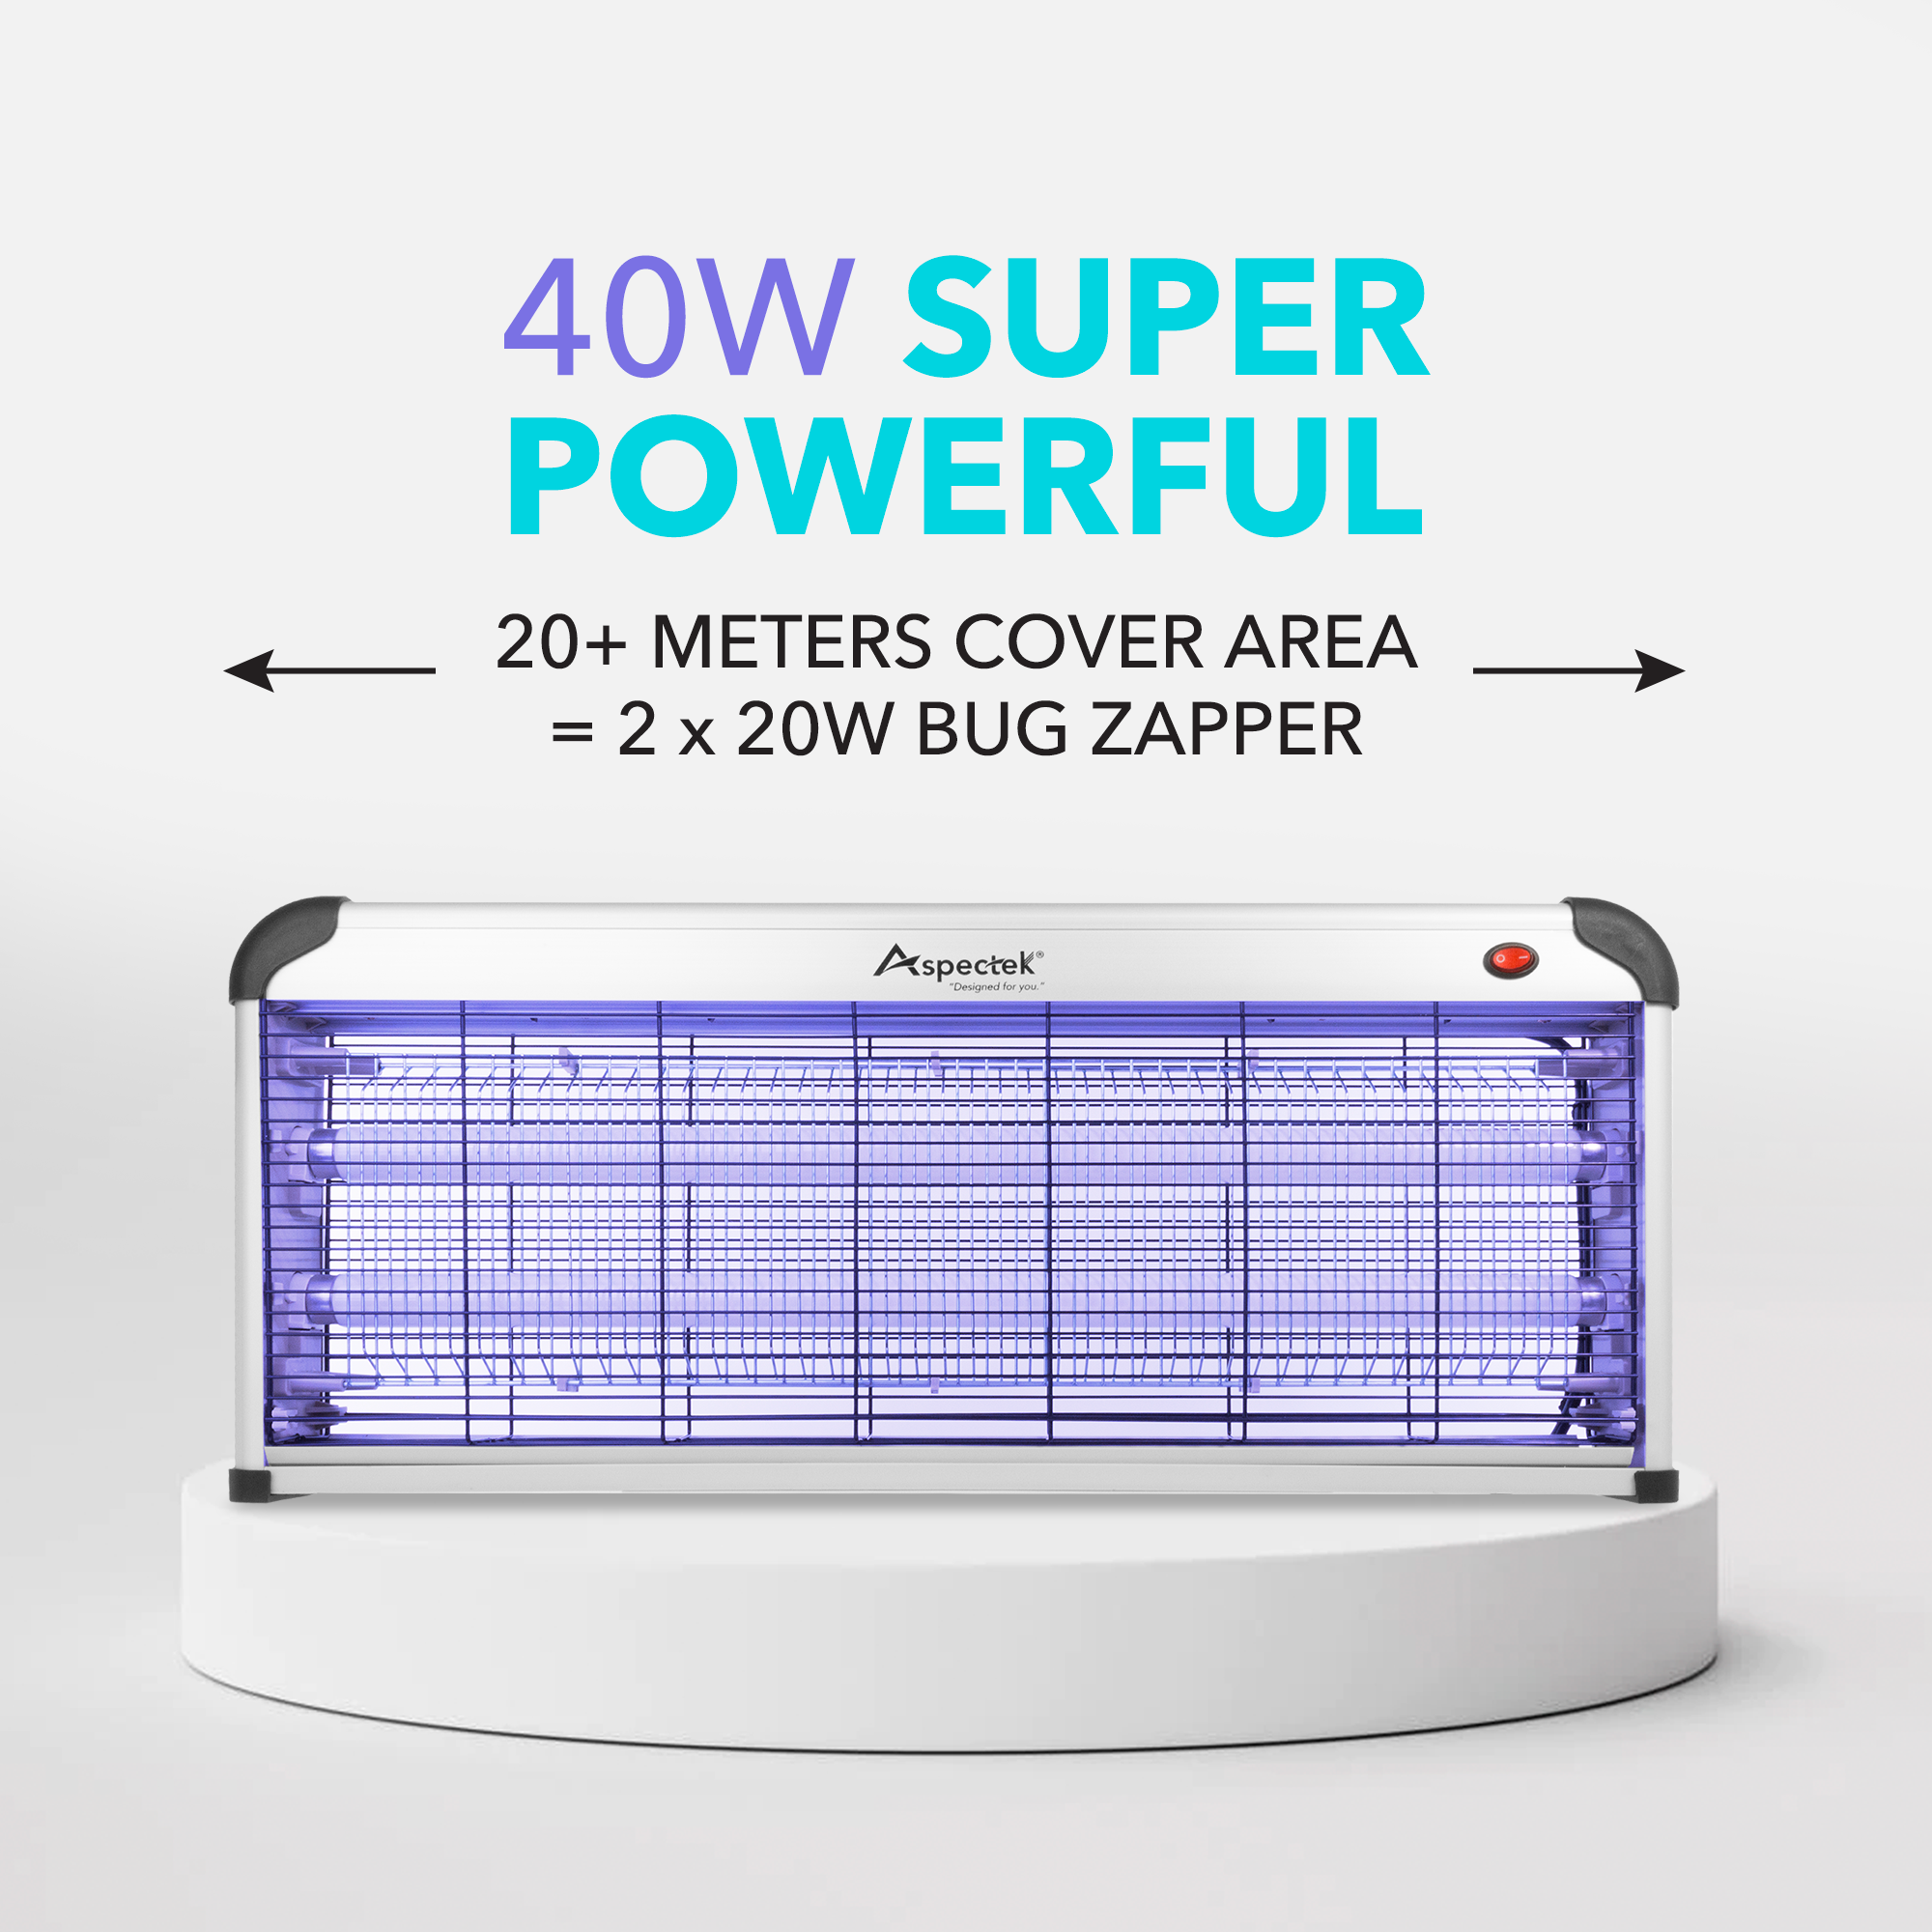 Aspectek Powerful 40W Bug Zapper: Your Ultimate Weapon Against Pesky Insects